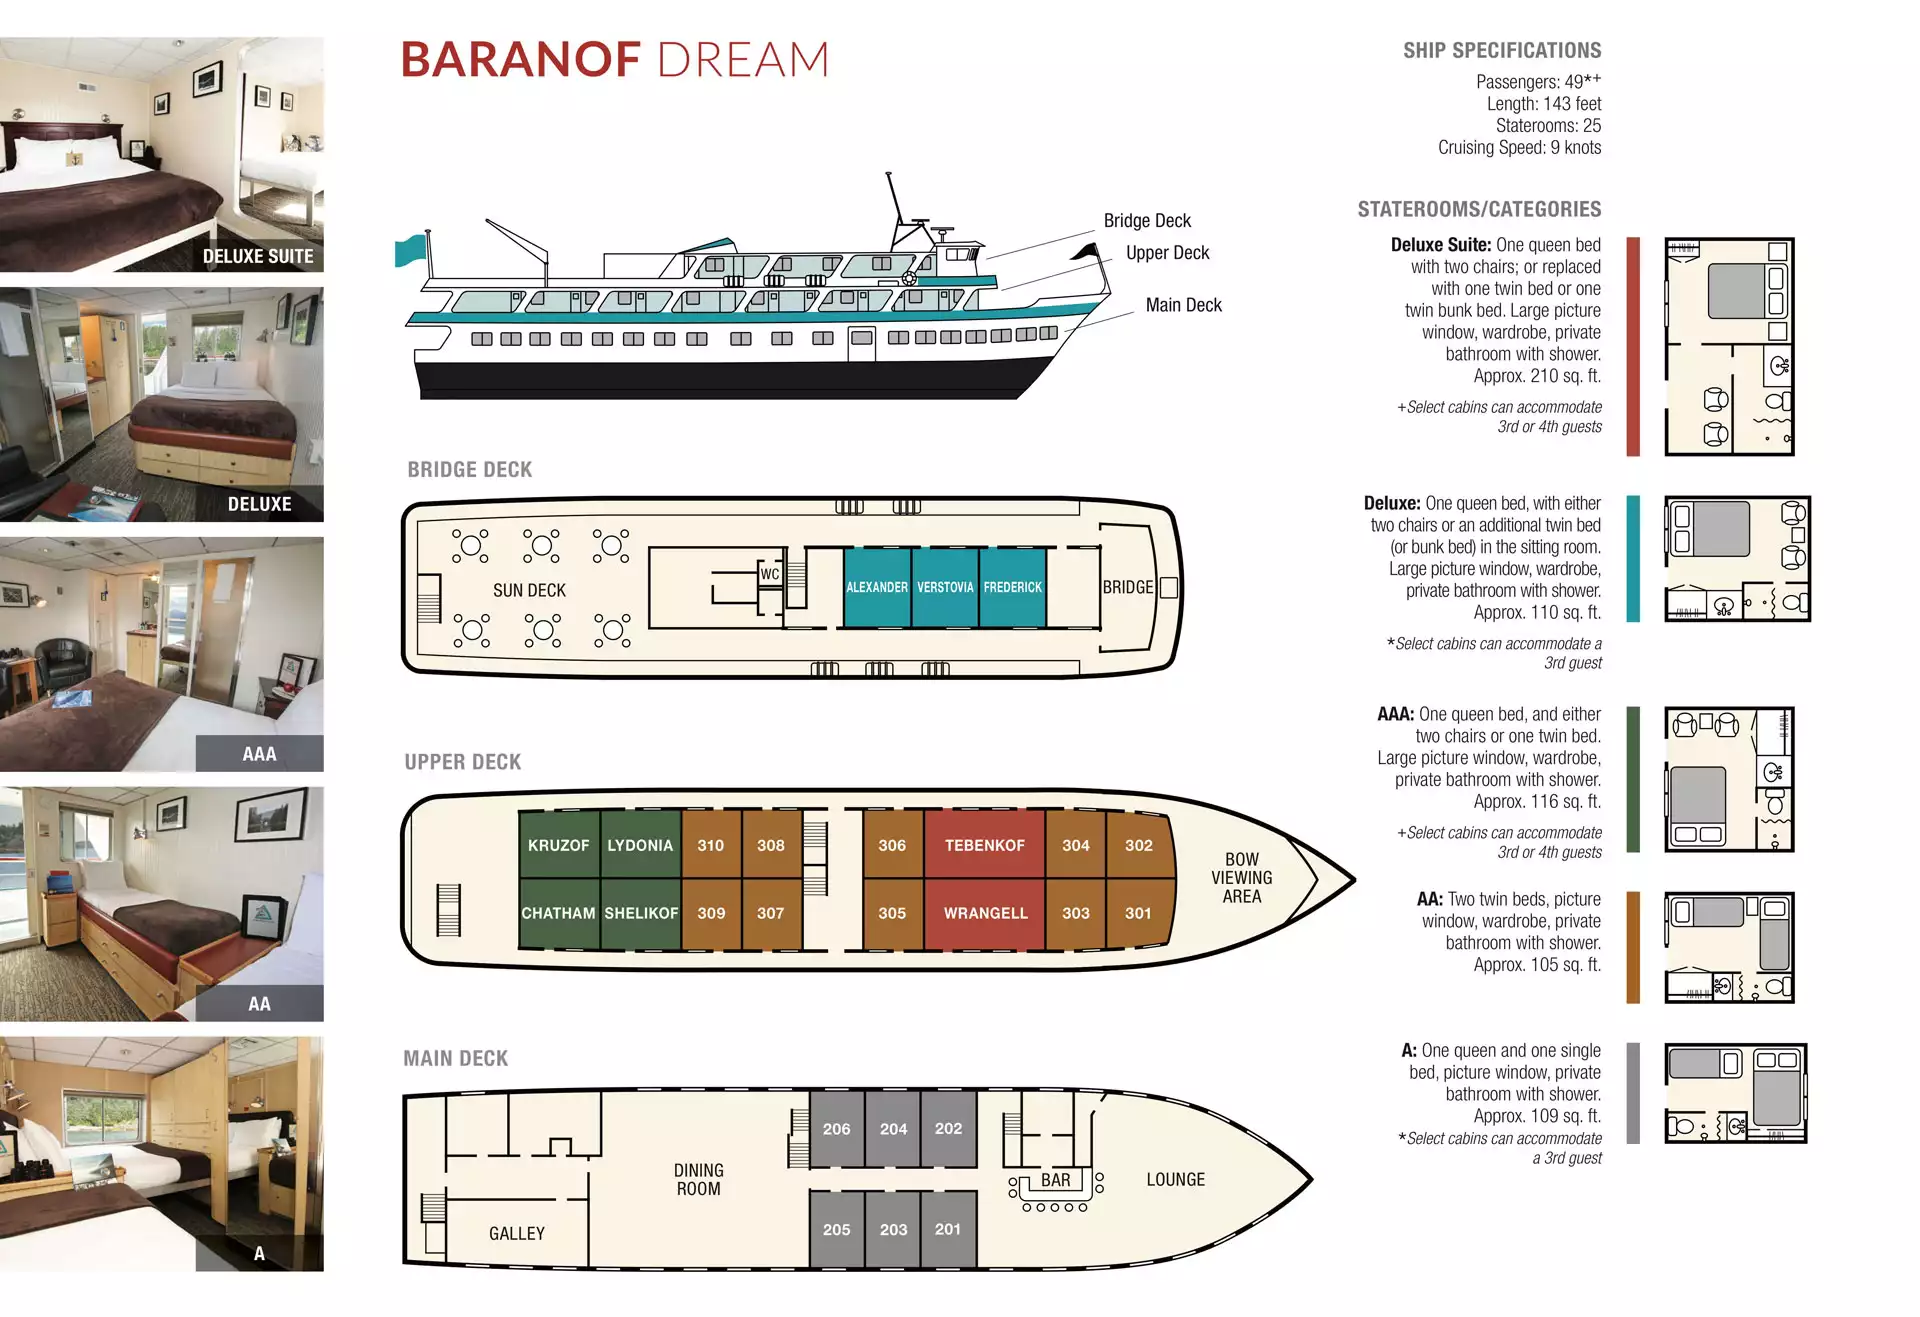 Deck plan showing 3 decks aboard Baranof Dream cruise ship & 5 cabin categories by color.